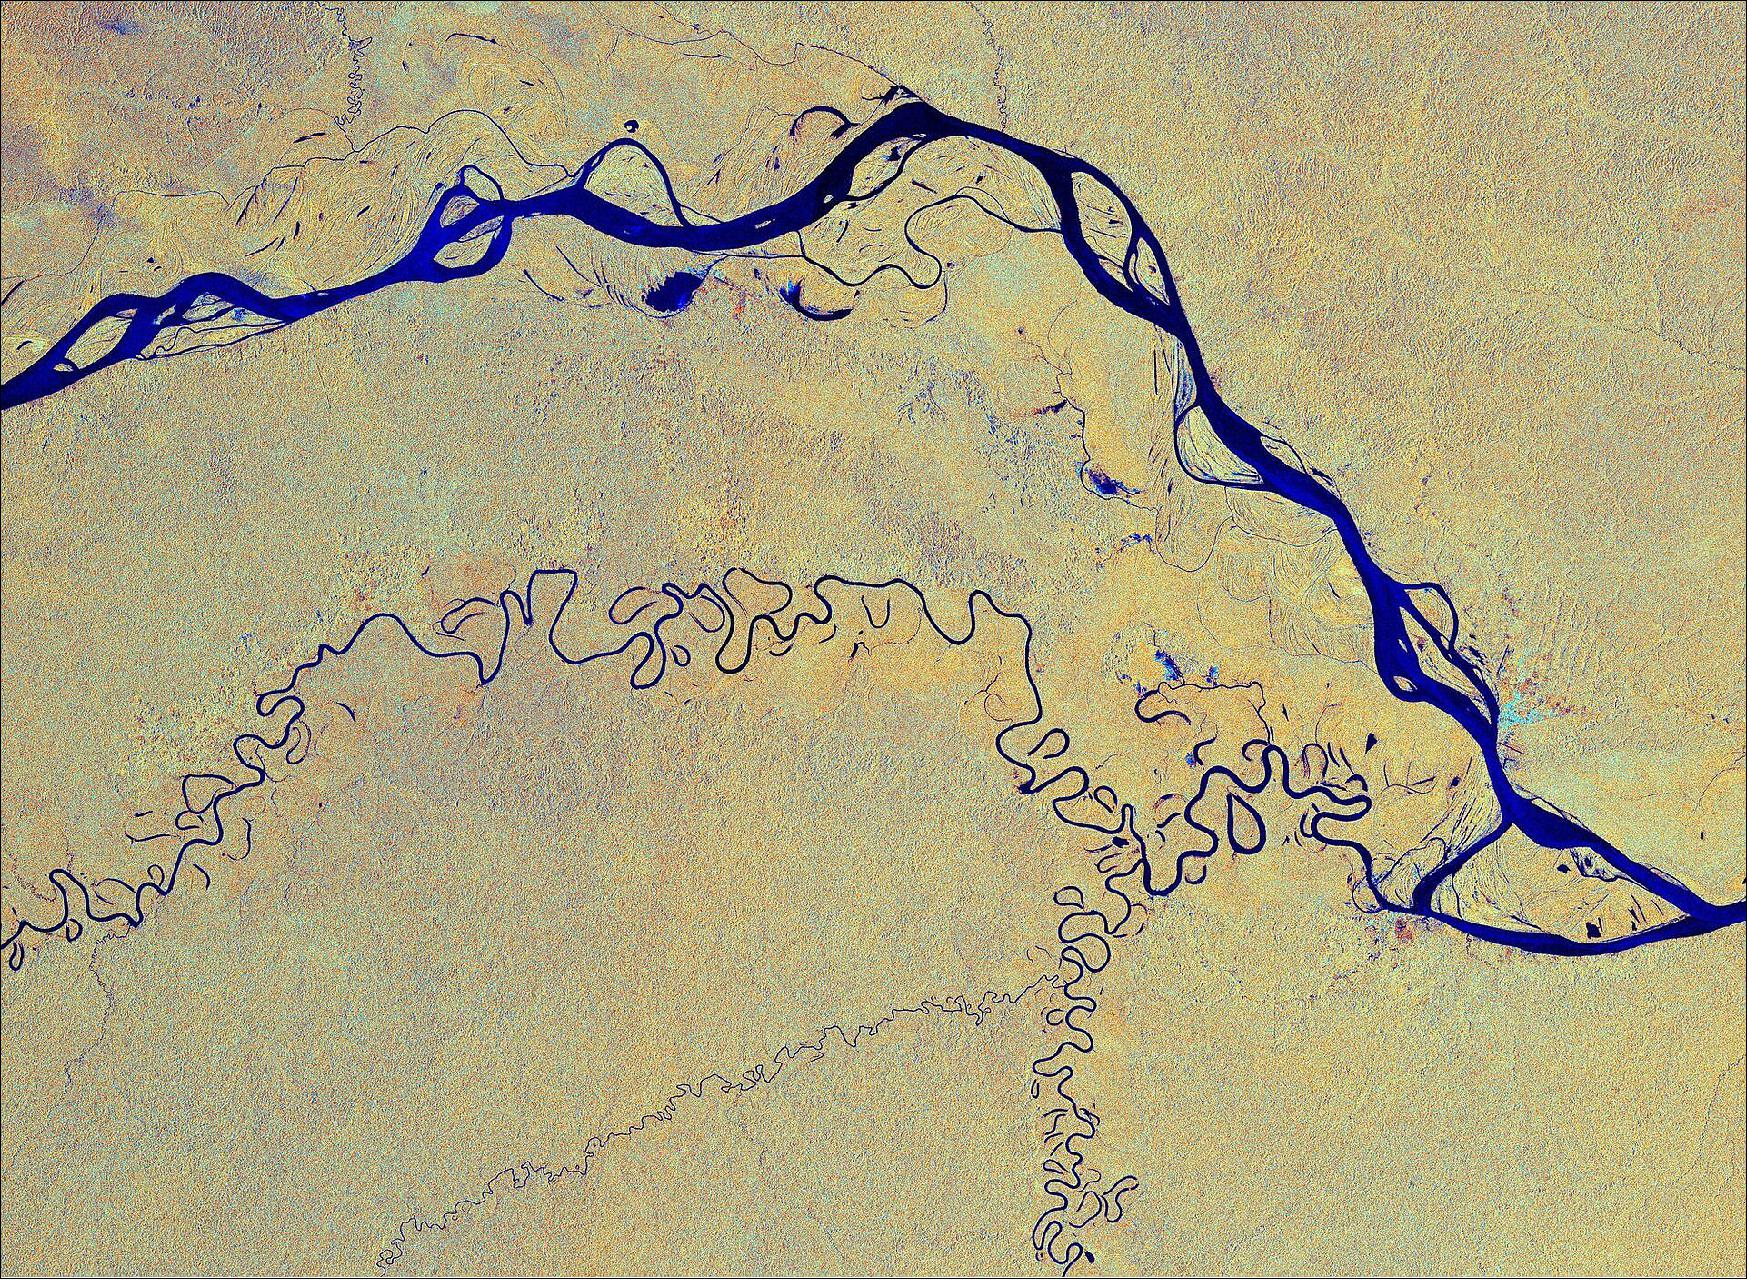 Figure 11: This Sentinel-1 image has been processed in a way that shows water bodies, such as the Amazon River, in blue. The Amazon river begins its journey in the Andes and makes its way east through six South American countries before emptying into the Atlantic Ocean on the northeast coast of Brazil. The river has a length of around 6400 km – the equivalent of the distance from New York City to Rome. This image, acquired on 3 March 2019, is also featured on the Earth from Space video program (image credit: ESA, the image contains modified Copernicus Sentinel data (2019), processed by ESA, CC BY-SA 3.0 IGO)